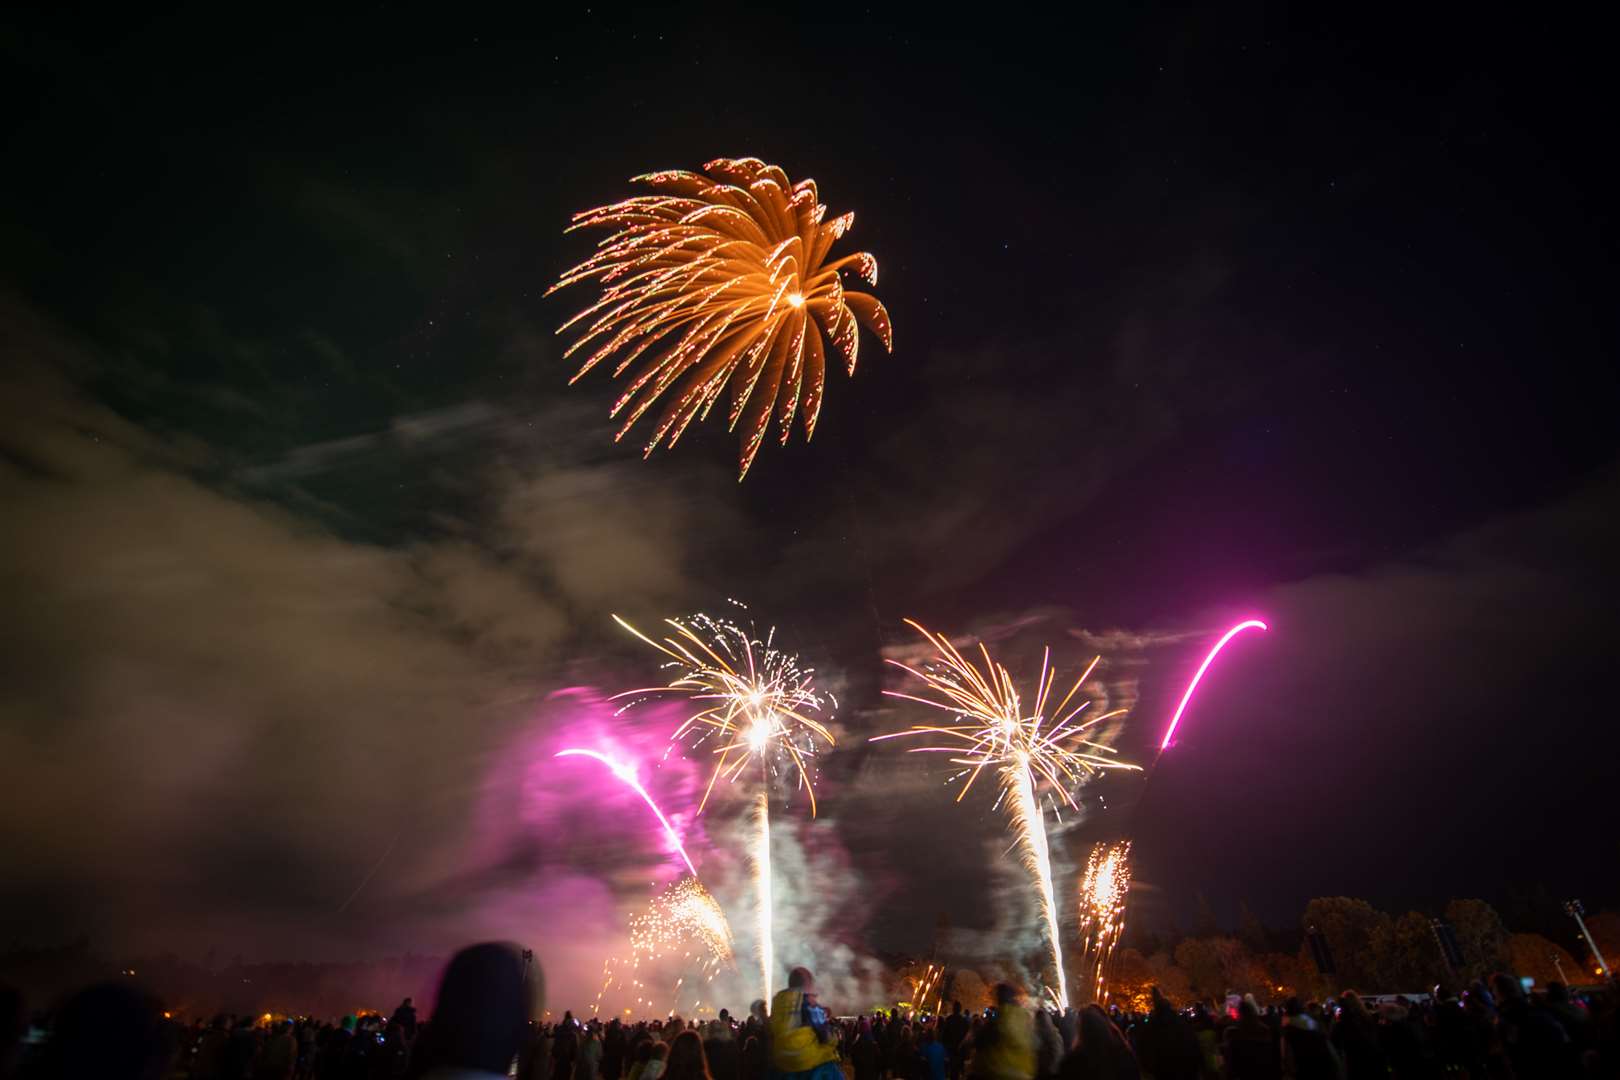 Thousands enjoy a musical fireworks display in the night sky over Inverness. Picture: Callum Mackay.